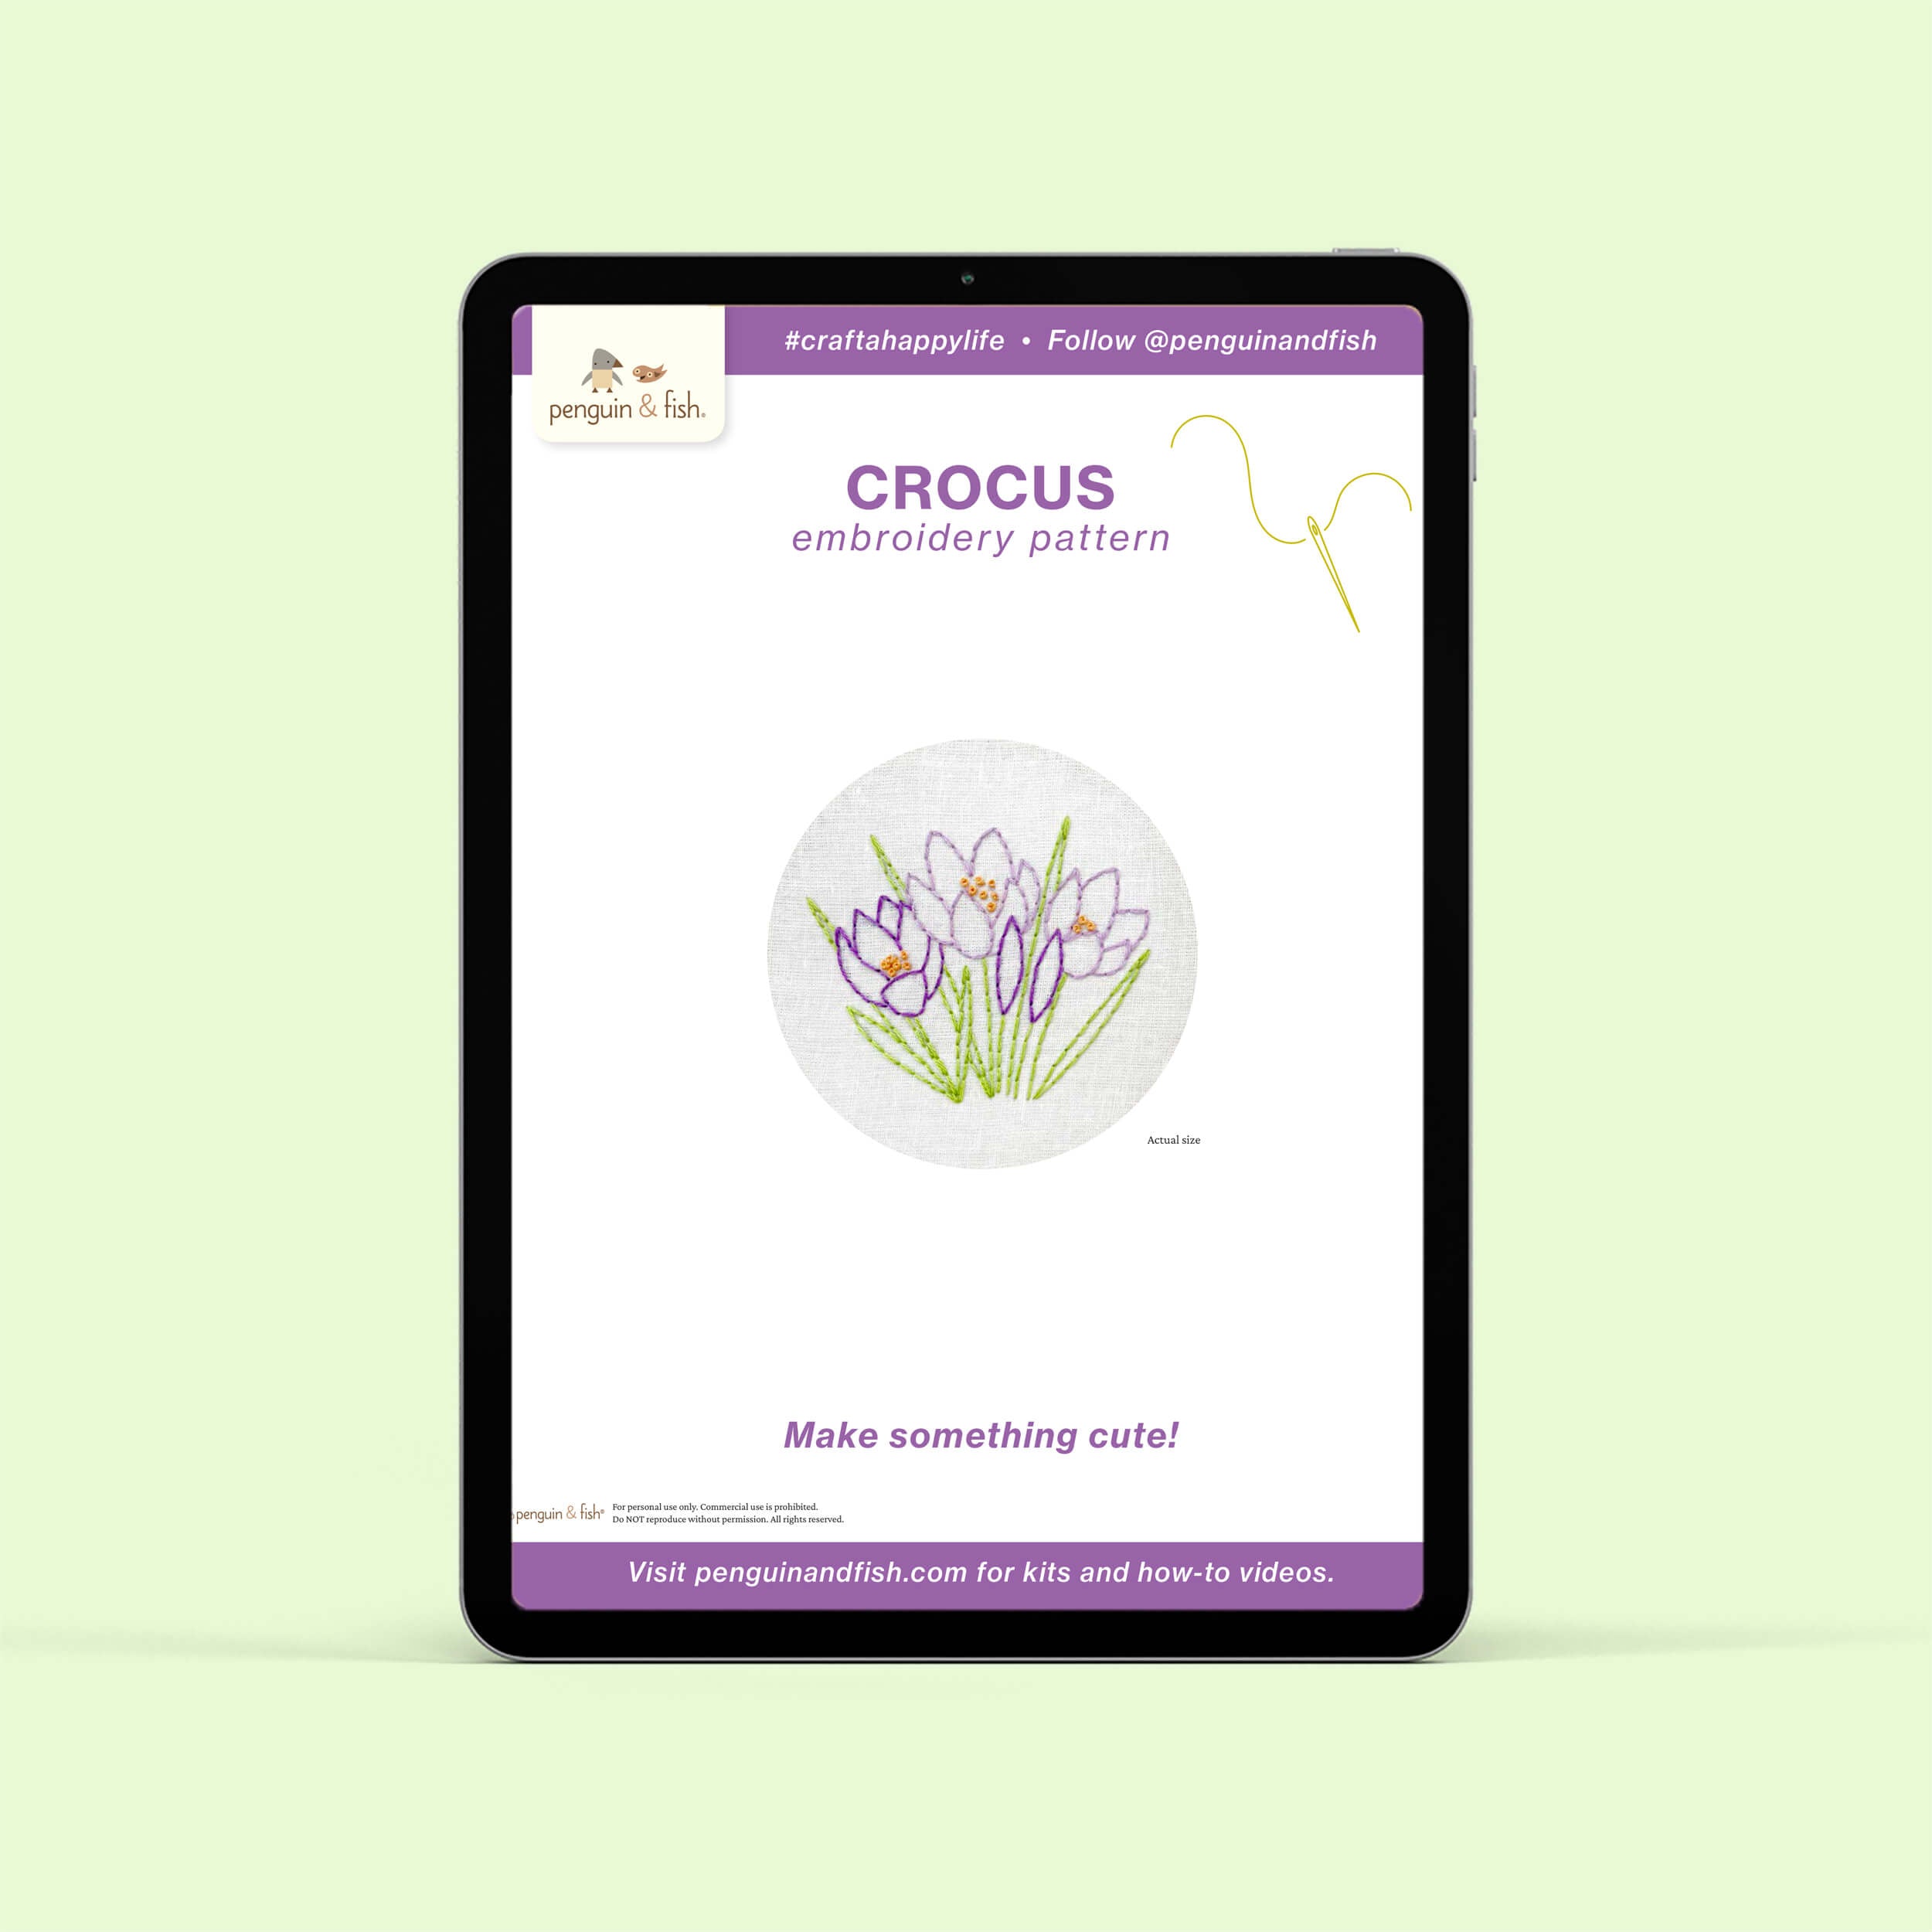 Crocus PDF embroidery pattern shown on a tablet